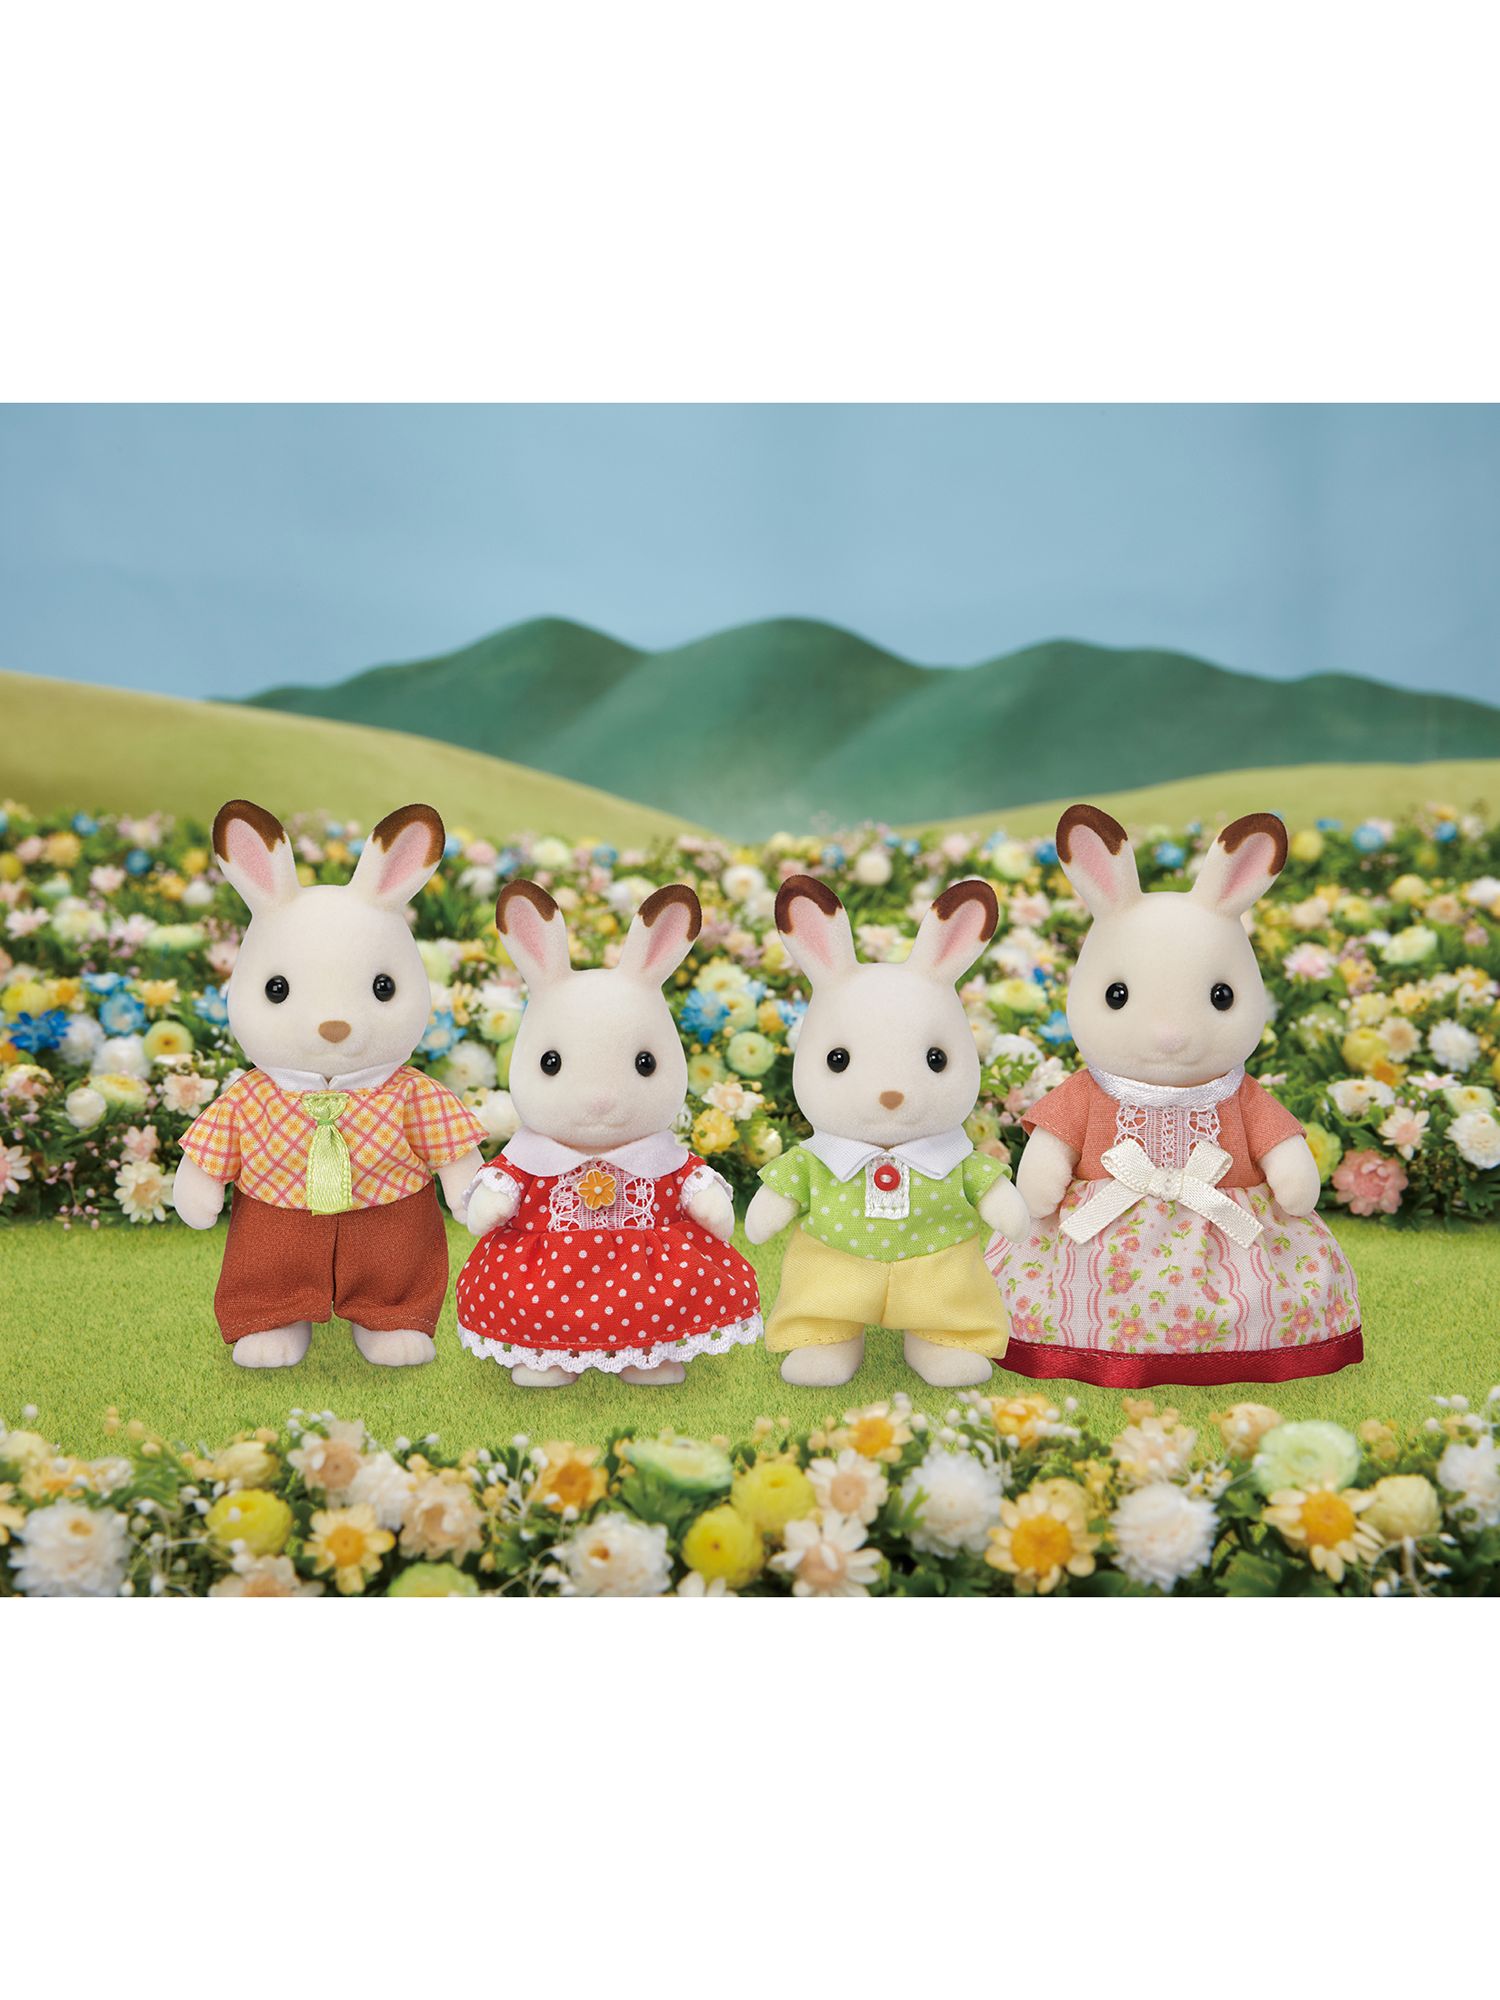 Top five: Sylvanian Families, Life and style